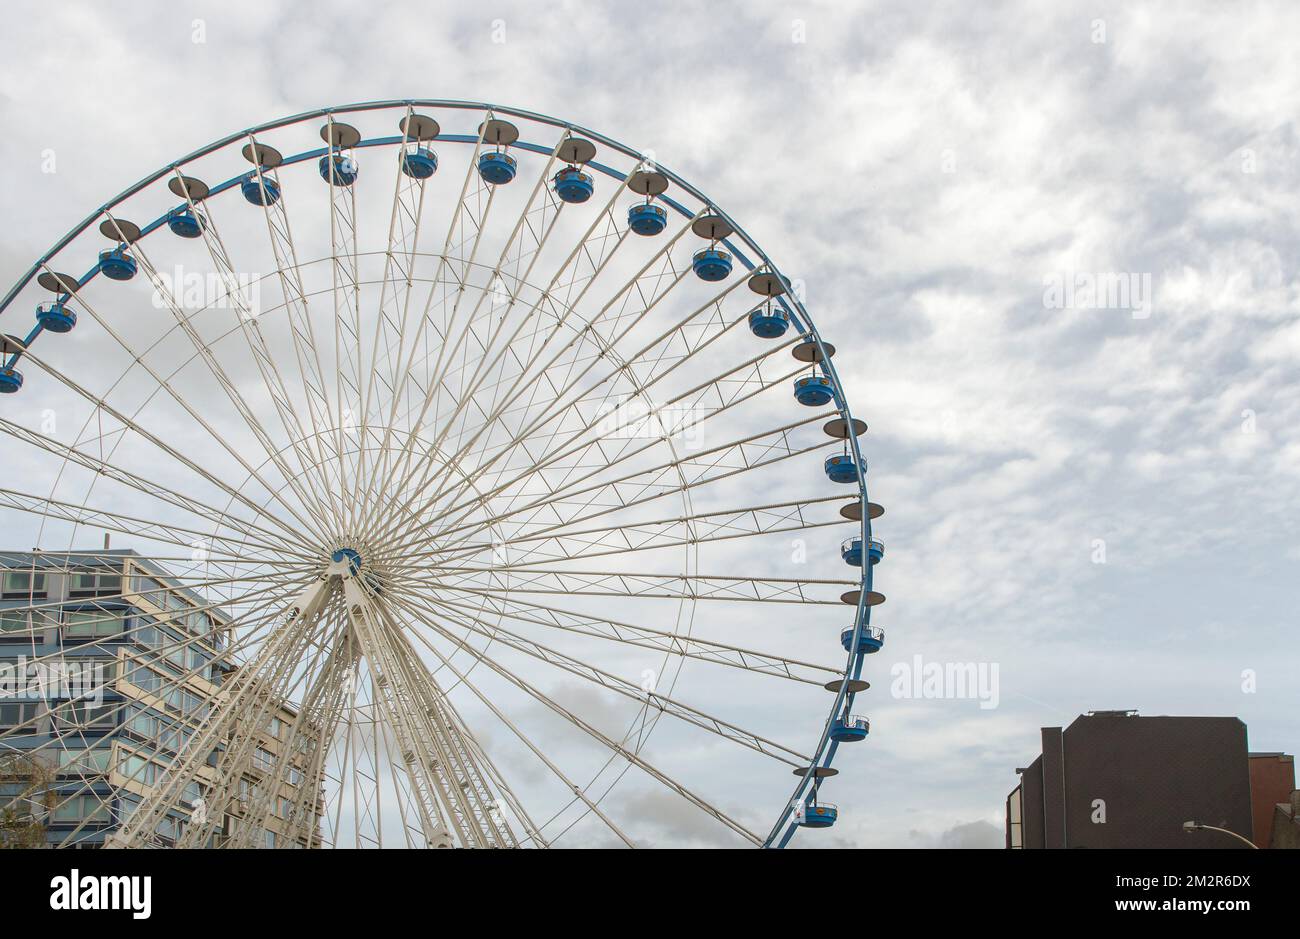 Ferris wheel located in the city. Copy space, autumn sky Stock Photo